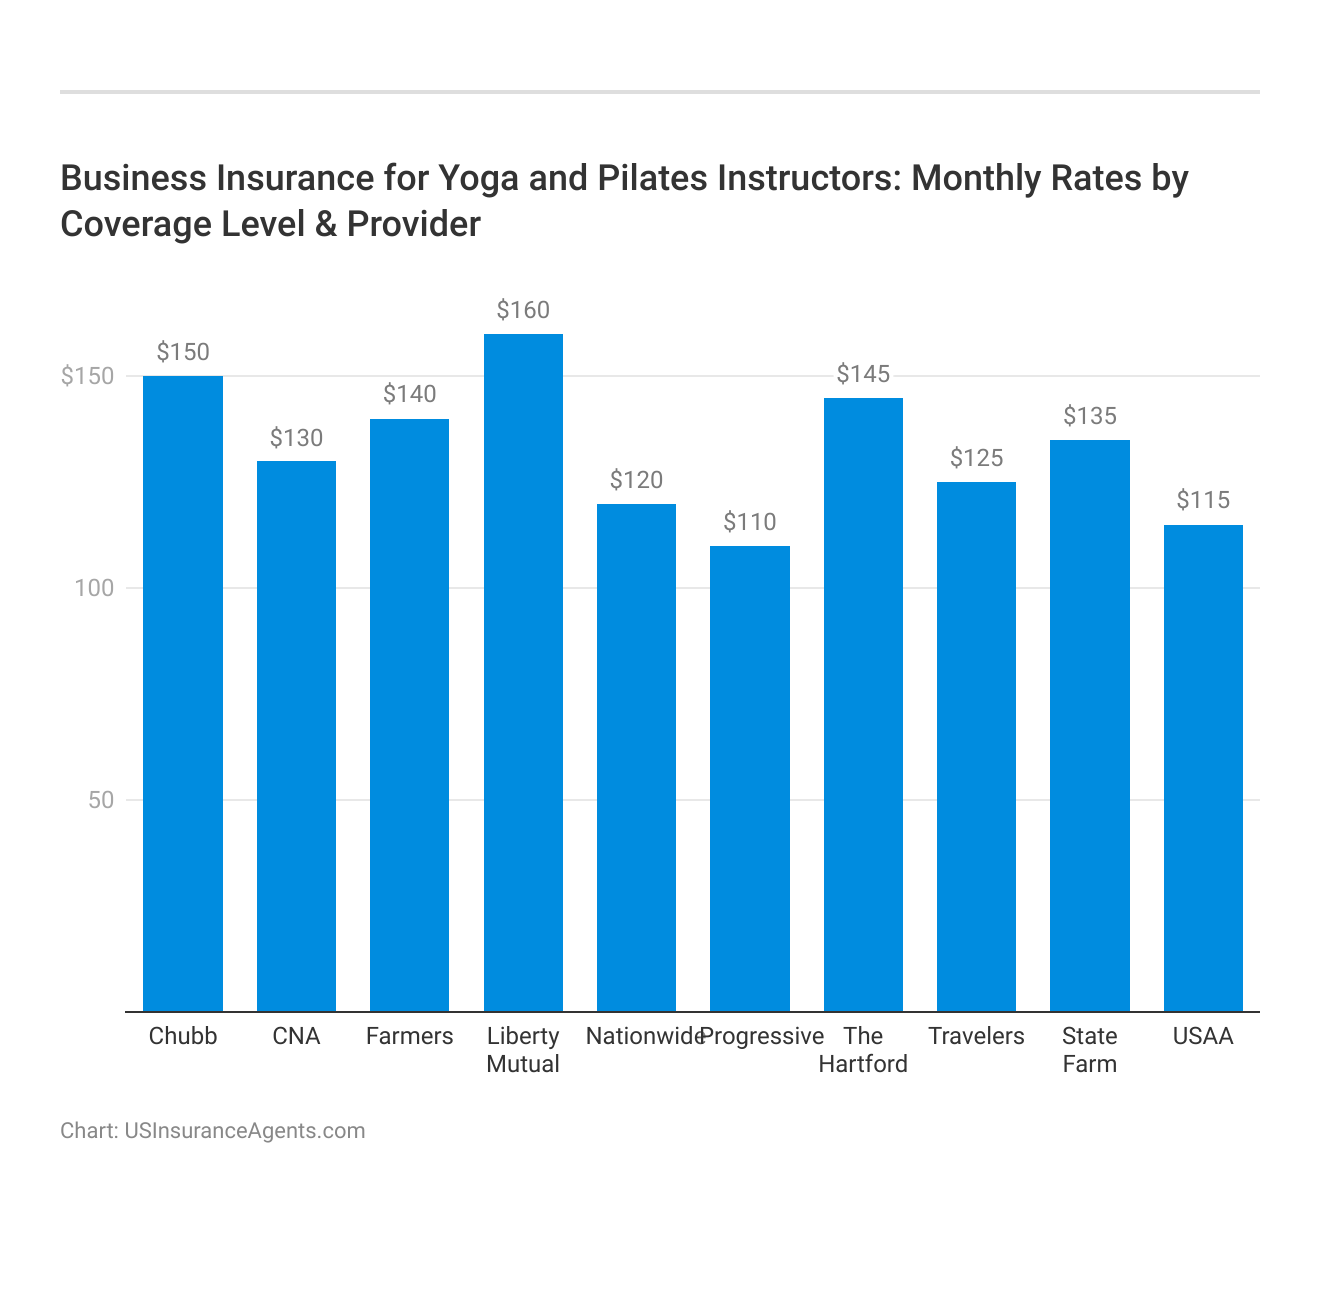 <h3>Business Insurance for Yoga and Pilates Instructors: Monthly Rates by Coverage Level & Provider</h3> 